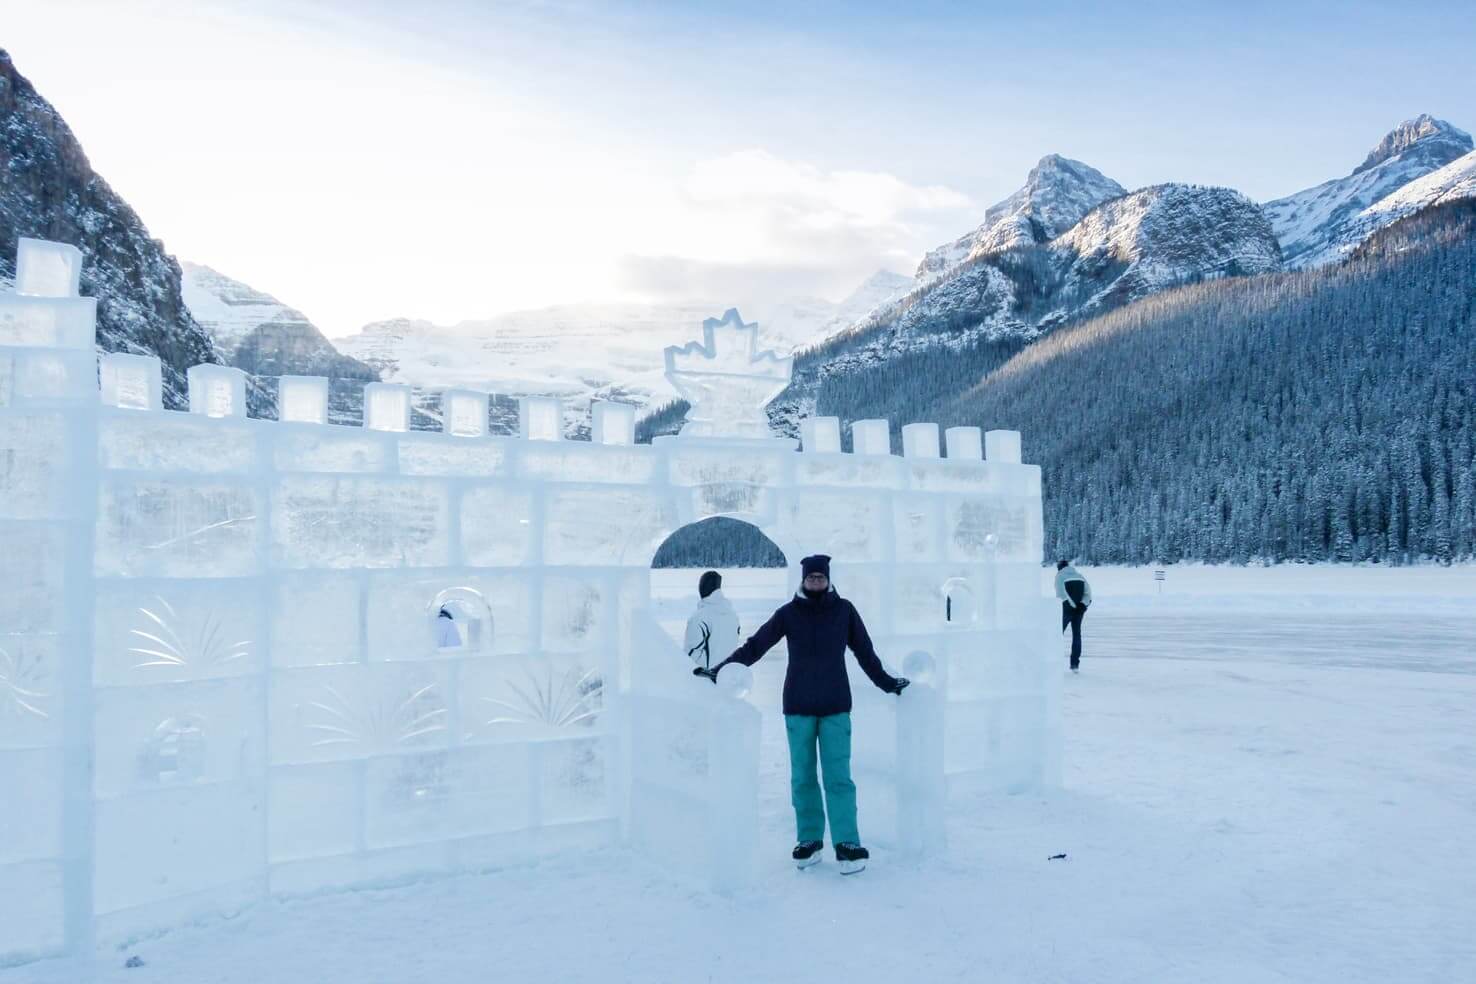 100 best things to do in Banff National Park, Canada - See ice castle & sculptures in Lake Louise